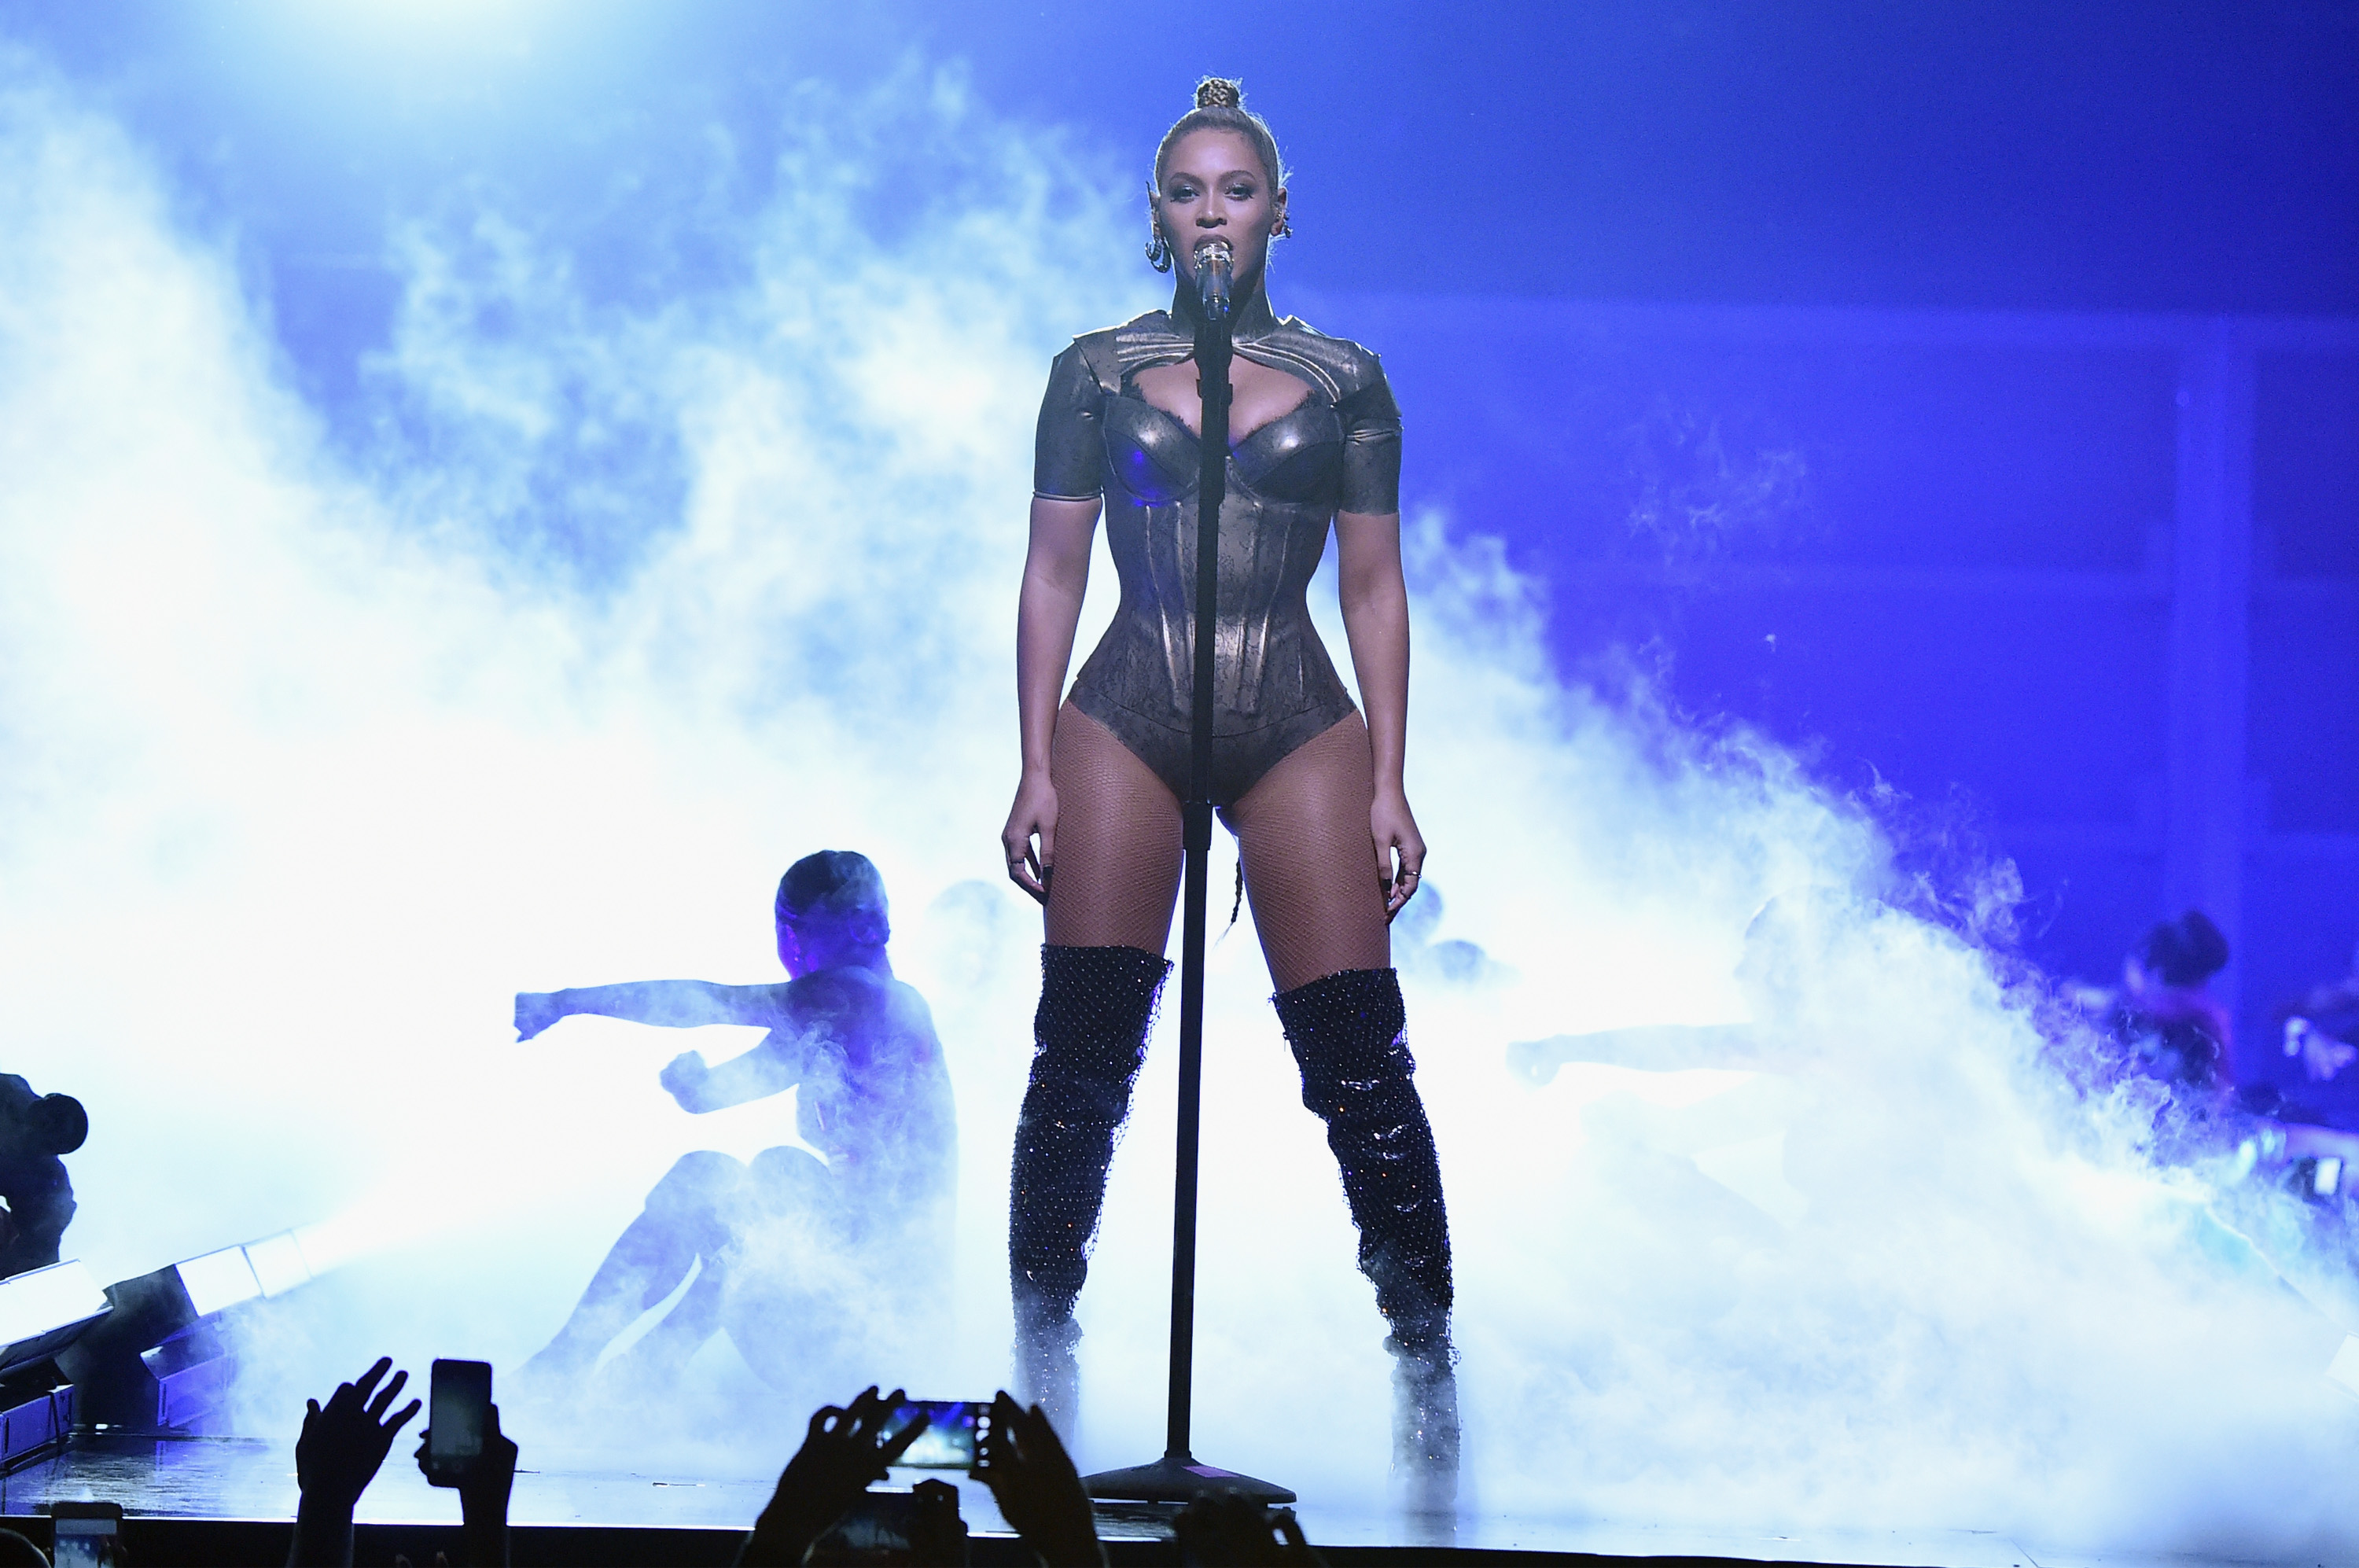 Beyonce Returns To Houston As “On The Run II” Tour Concludes